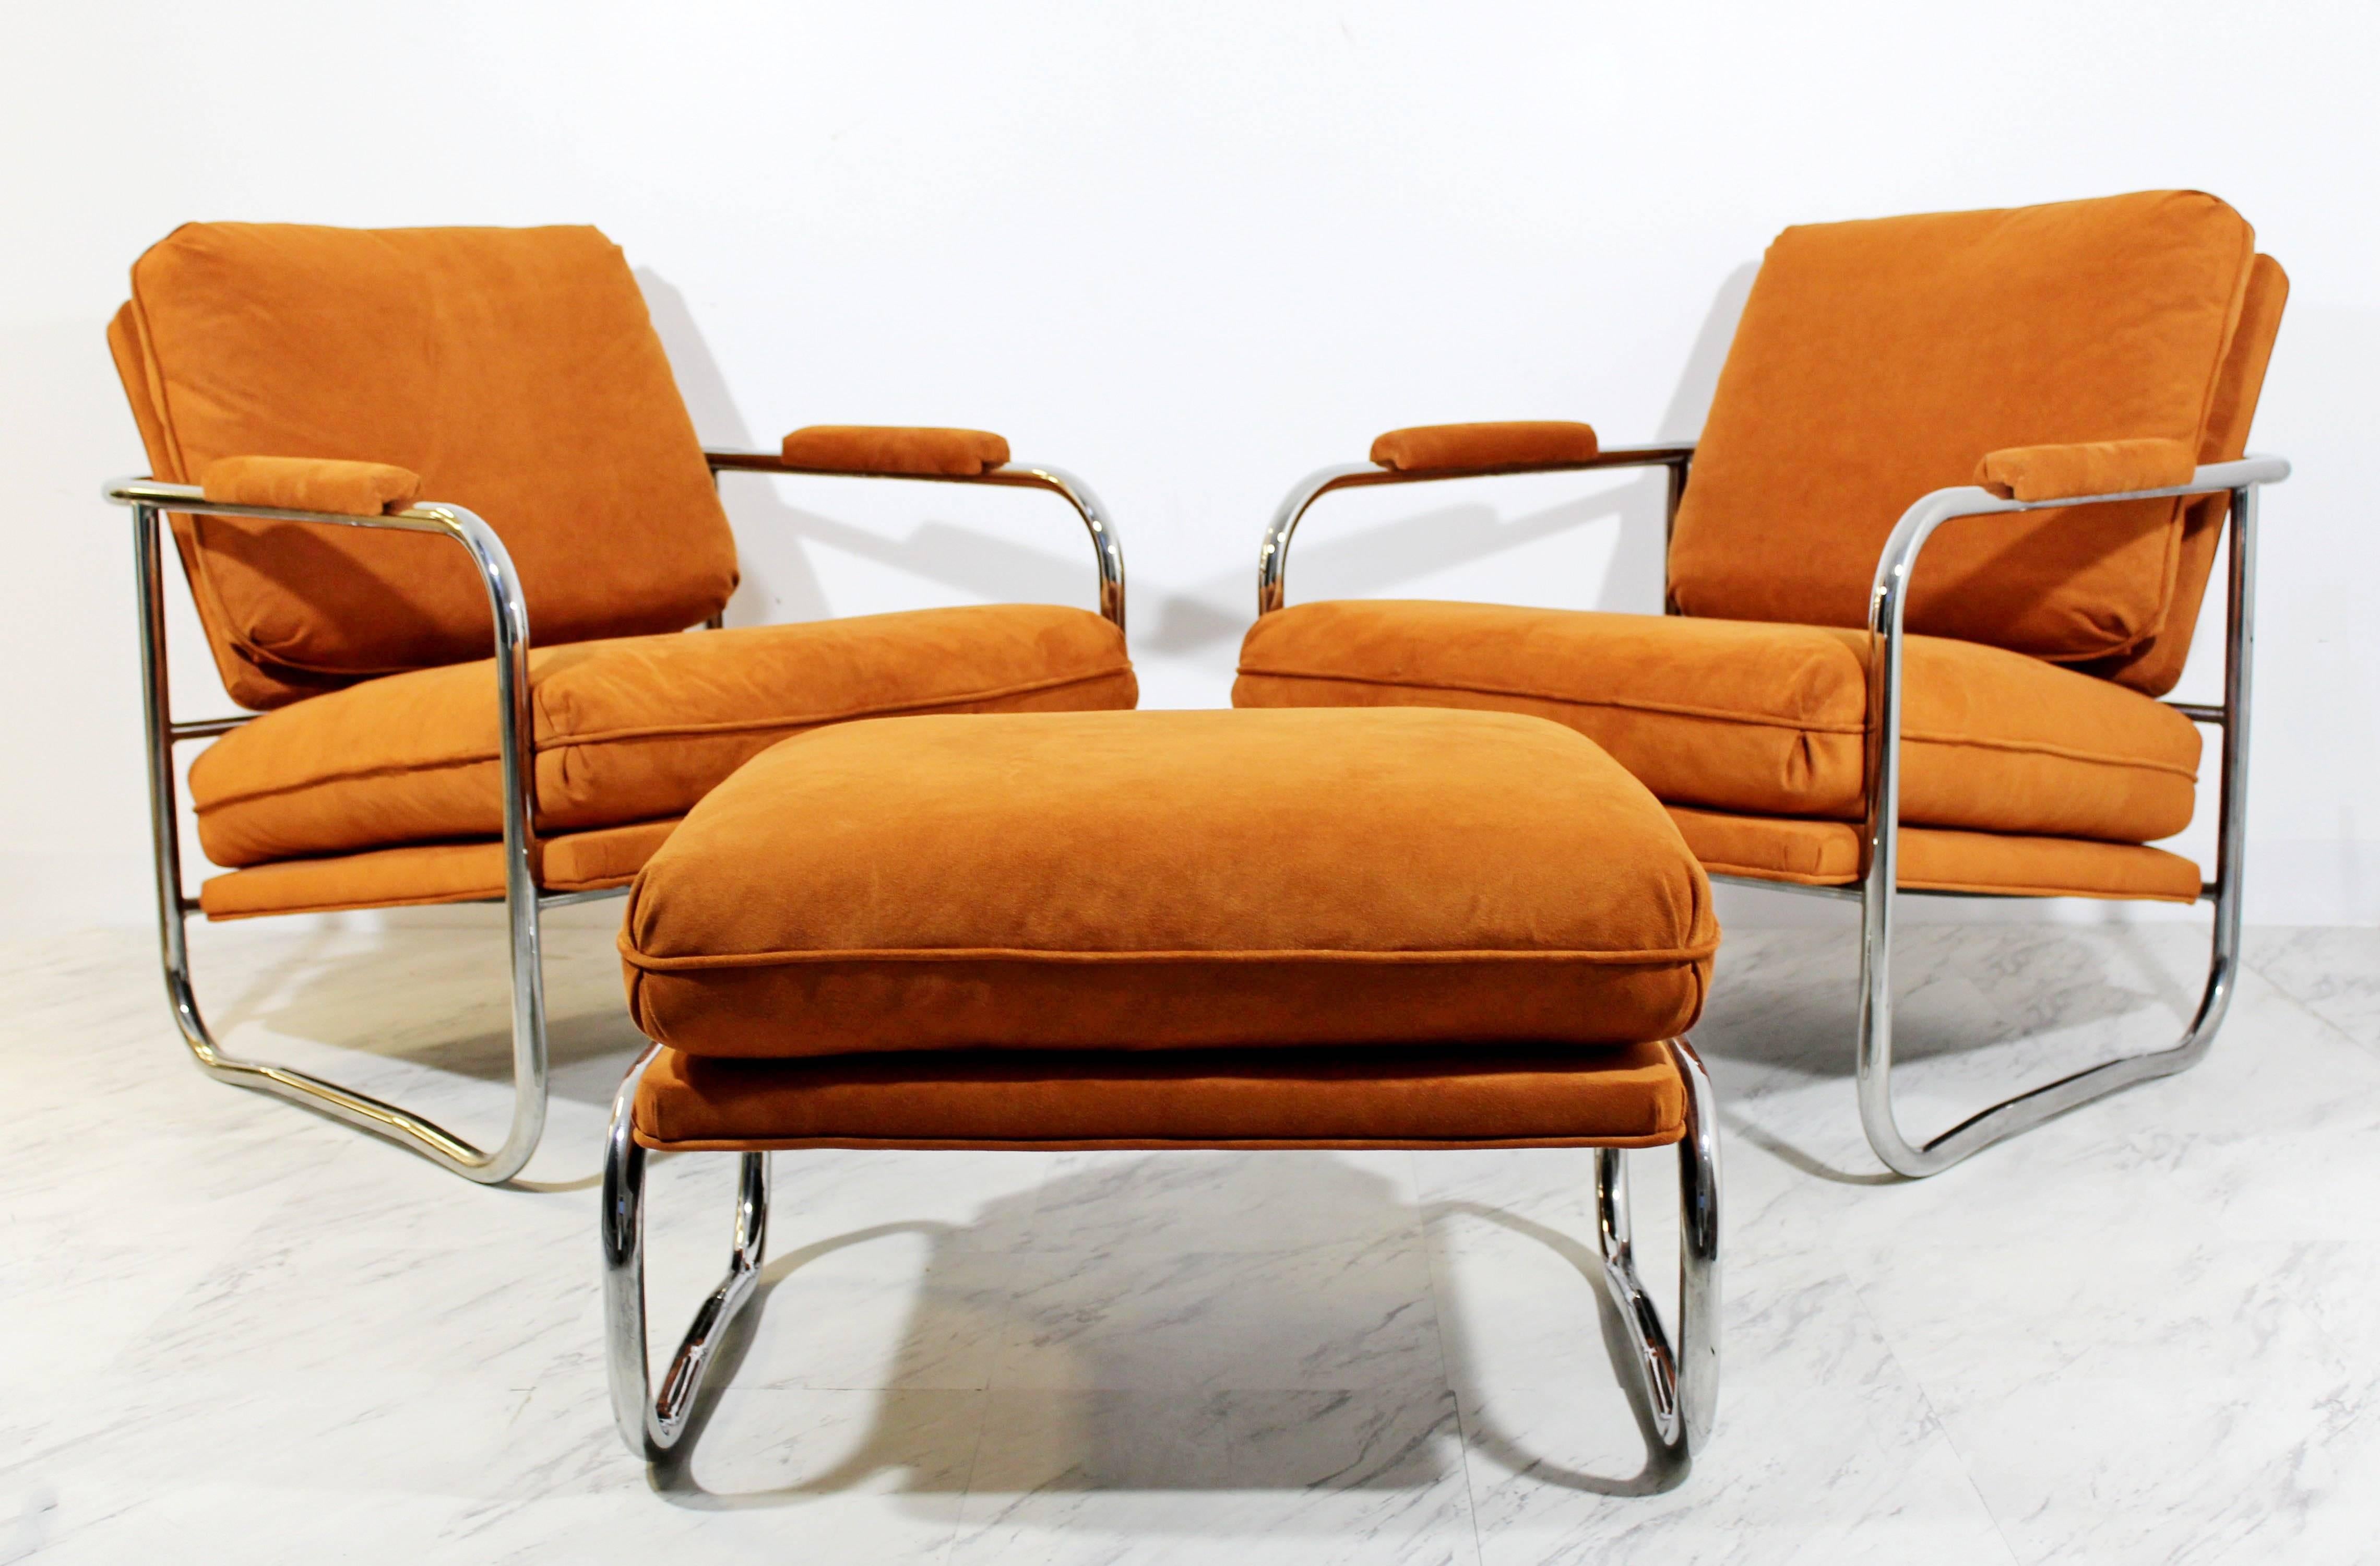 For your consideration is a remarkable pair of rare, tubular chrome, lounge chairs, and matching ottoman by Milo Baughman. The interesting cushions sit on the base and come completely off for easy transfer and storage. In excellent condition. The